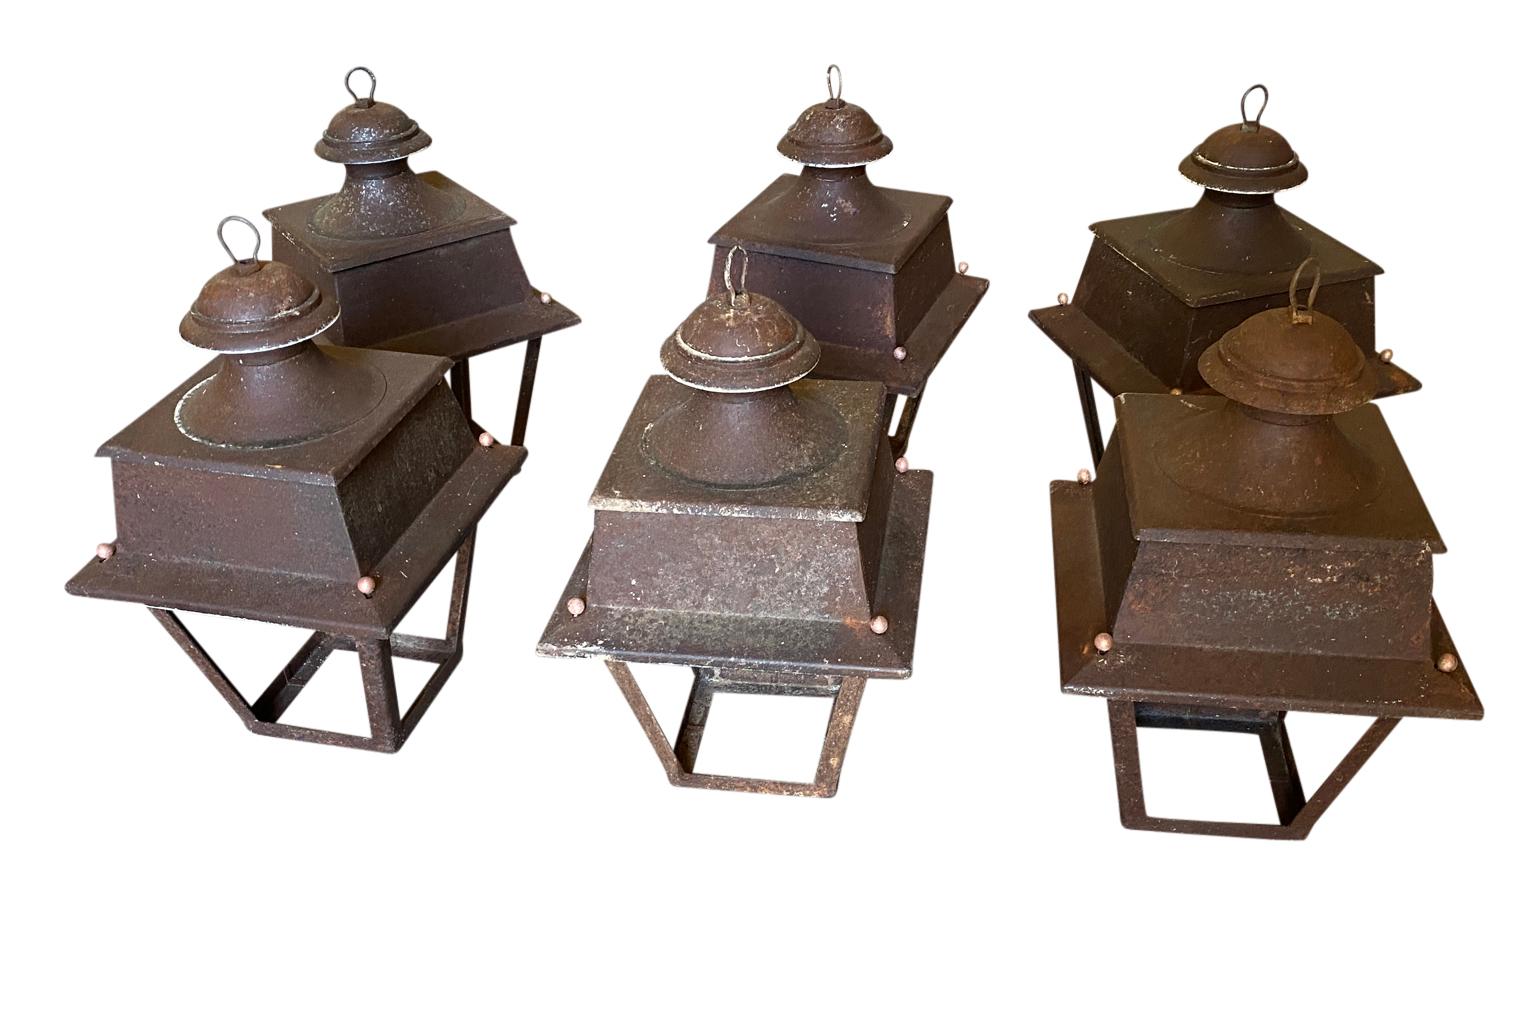 A very charming Set of 6 Iron Lanterns from the South of France. Lovely minimalist lines.